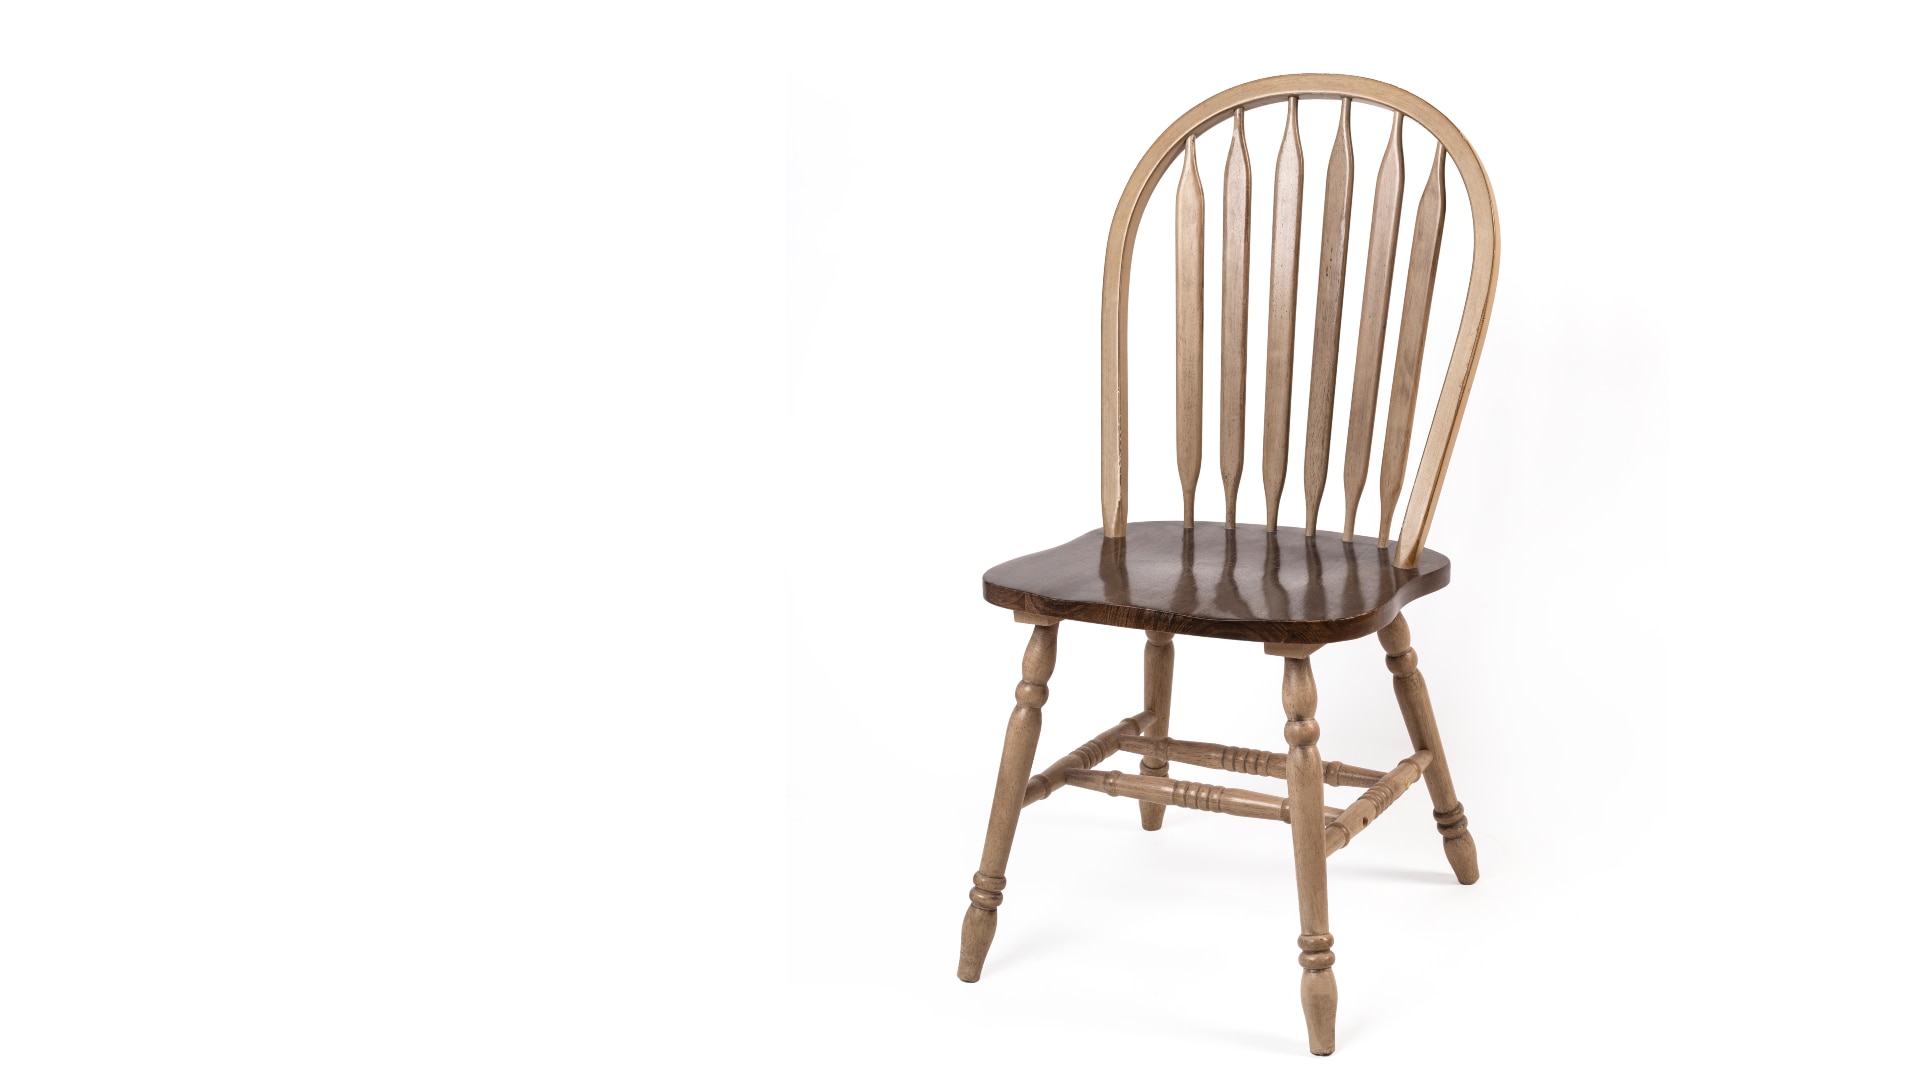 Colin Bisset's Iconic Designs — windsor chair